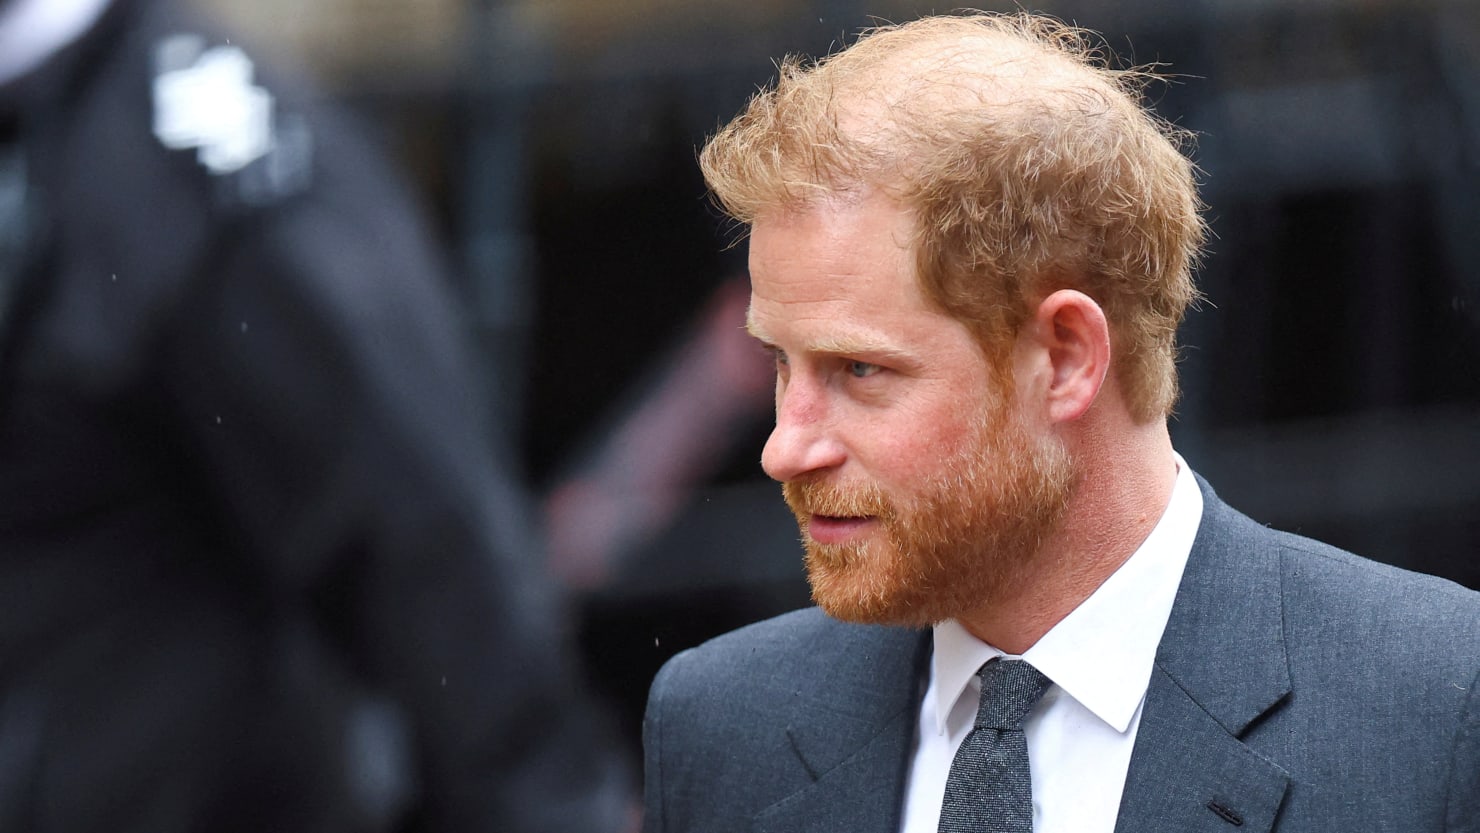 Prince Harry admits tabloid stories may not have been obtained illegally